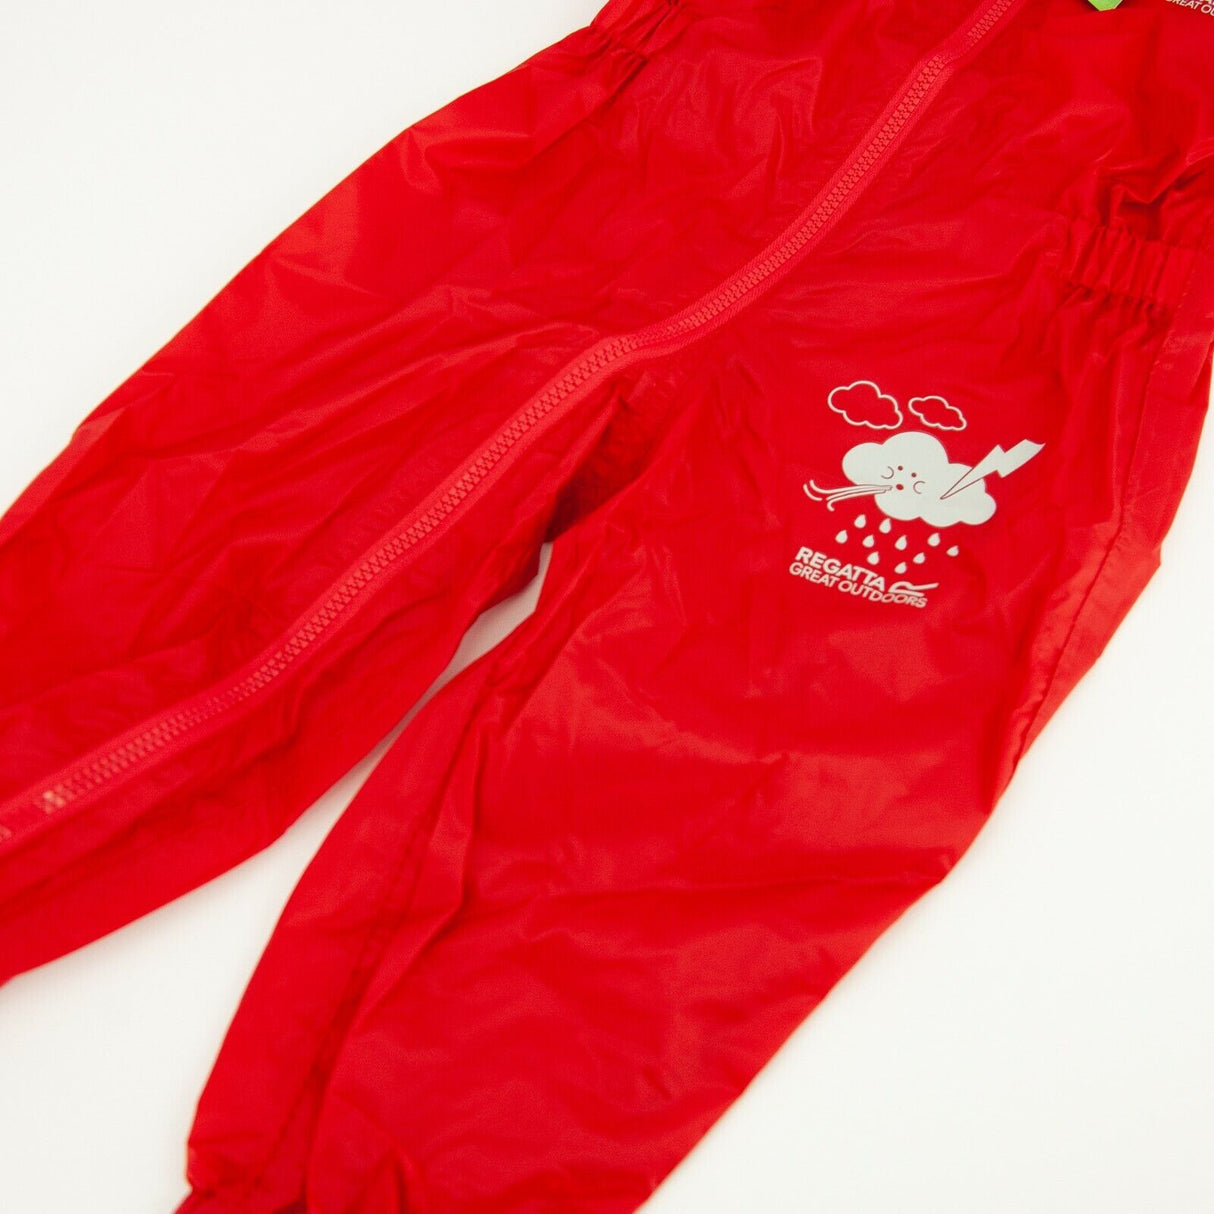 Regatta Puddle IV Boys and Girls Waterproof All In One Rain Suit - Premium clothing from Regatta - Just $14.99! Shop now at Warwickshire Clothing